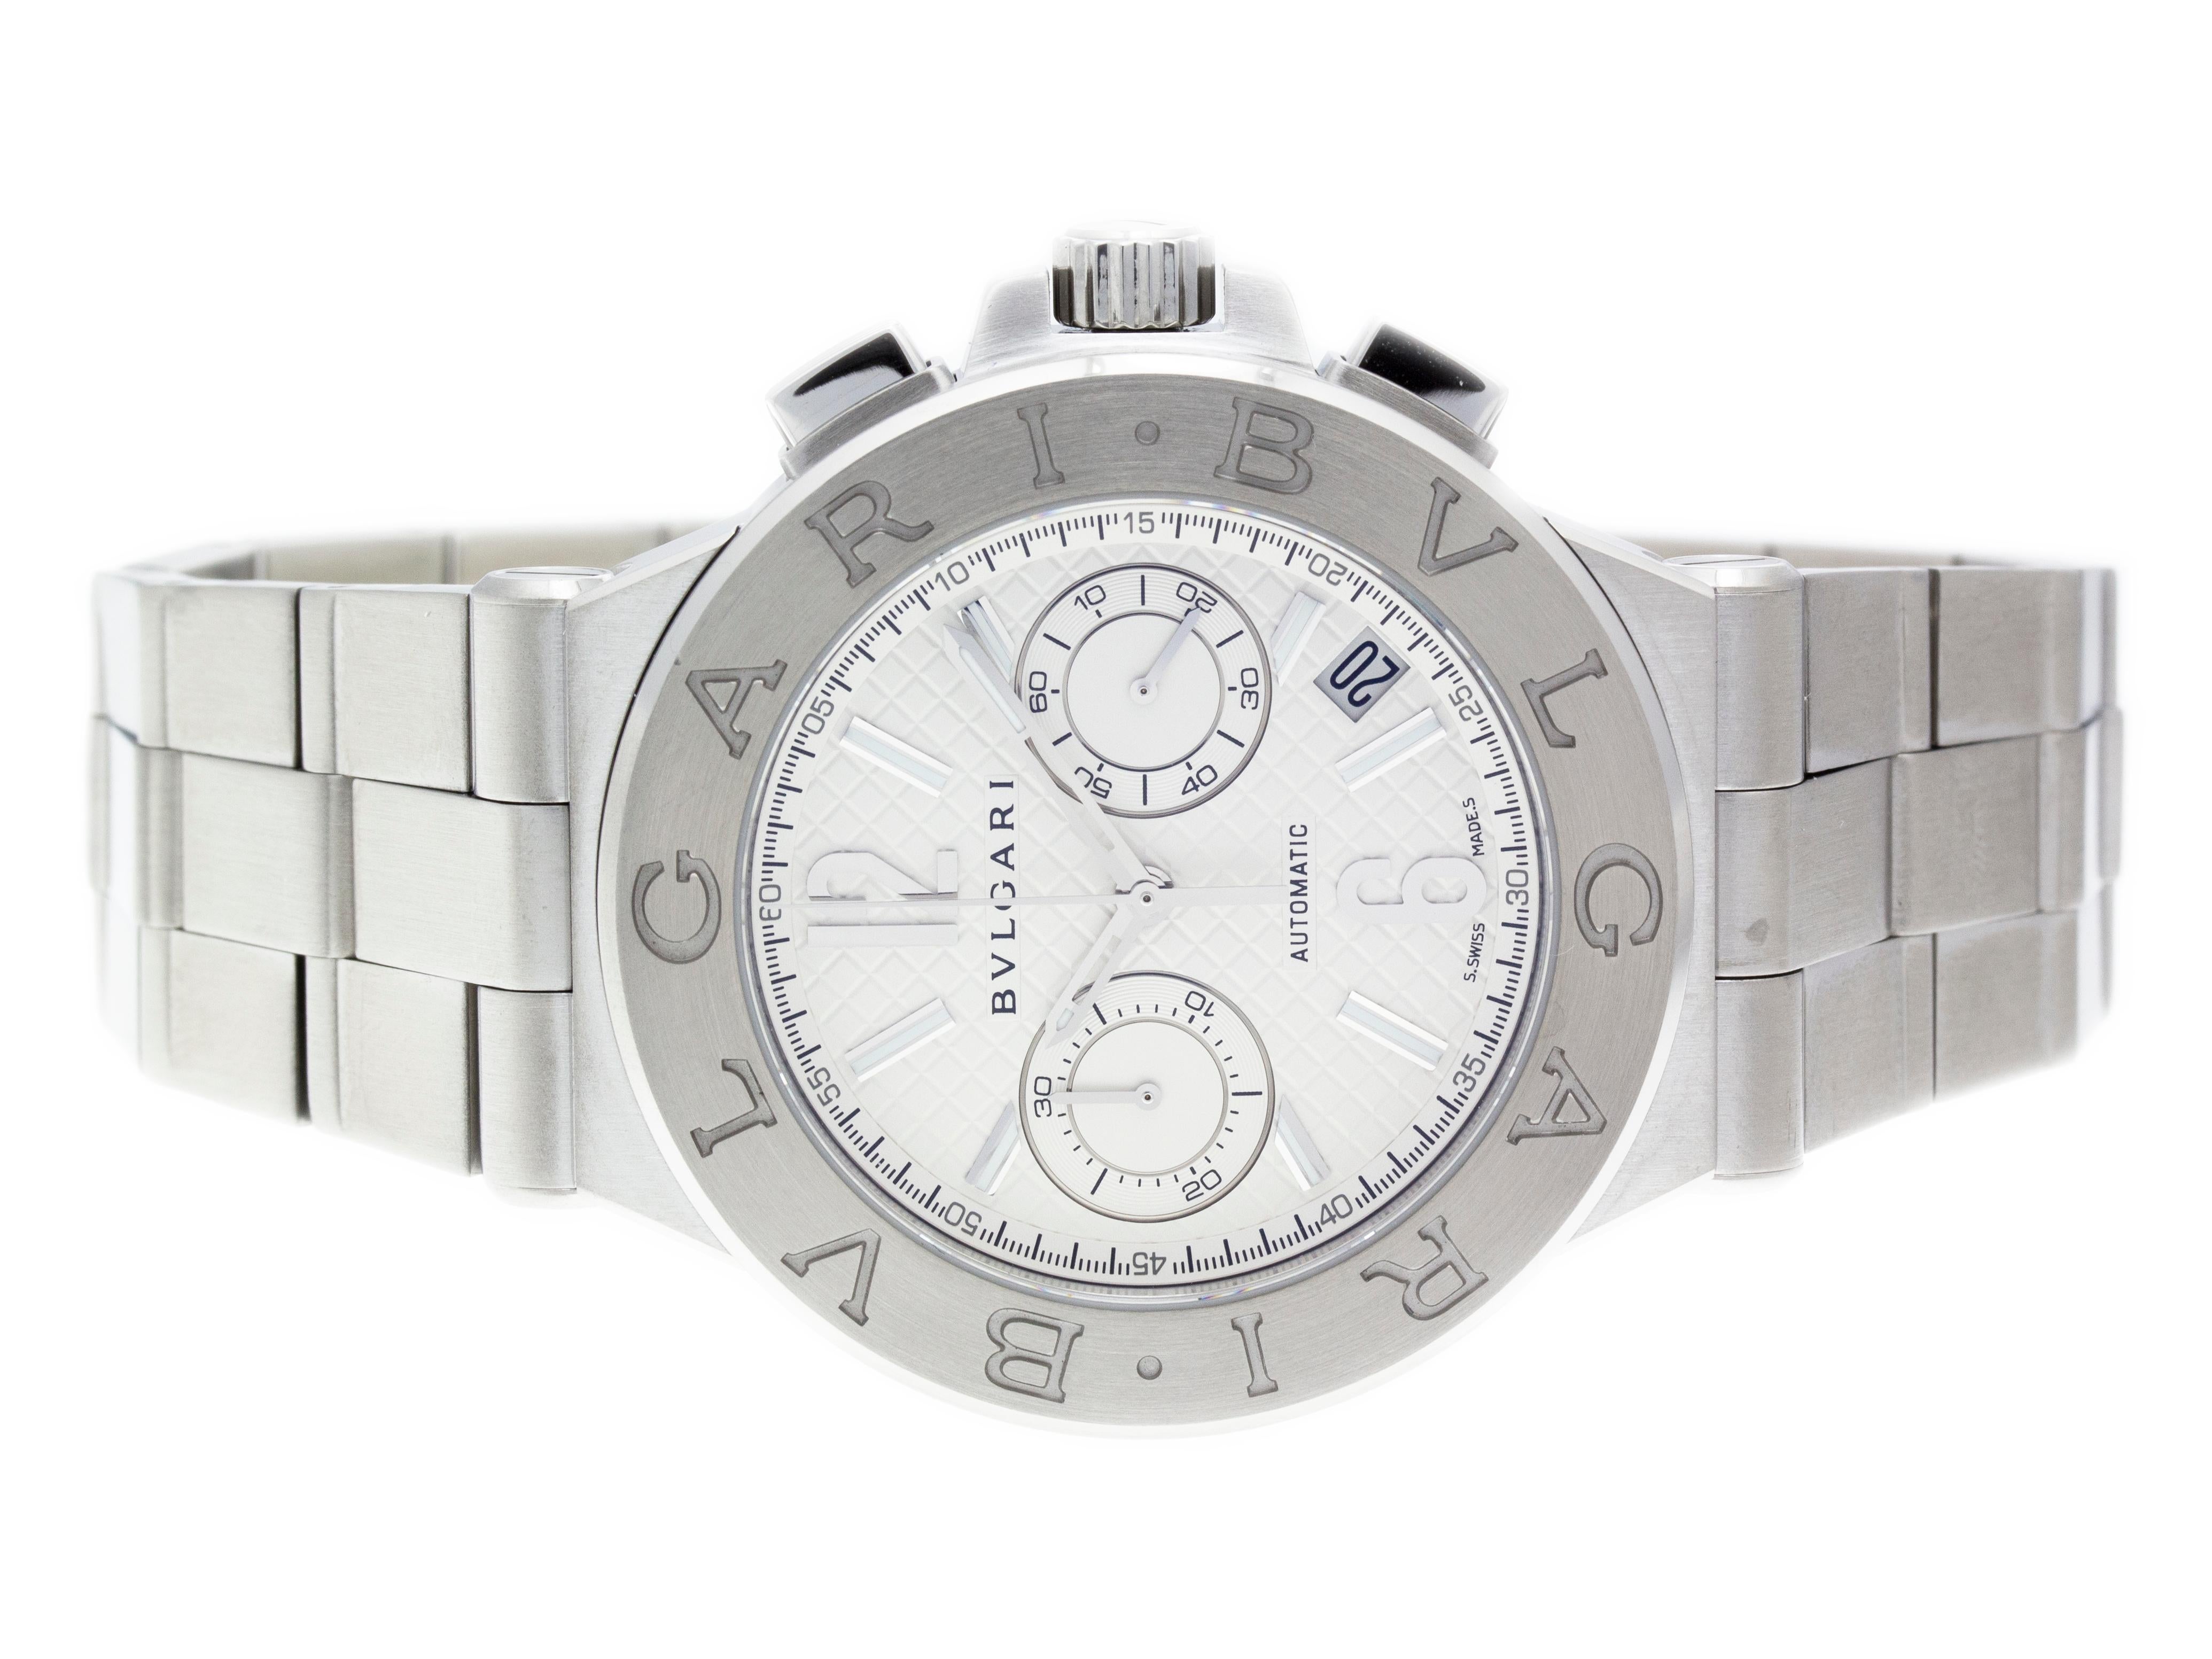 Stainless Steel BVLGARI Diagono Automatic watch with a 40mm case, Silver dial with luminescent tipped hands, and Stainless Steel Braclelet with Deployment Clasp. Features include hours, minutes, seconds, date, and chronograph. Comes with Gift Box